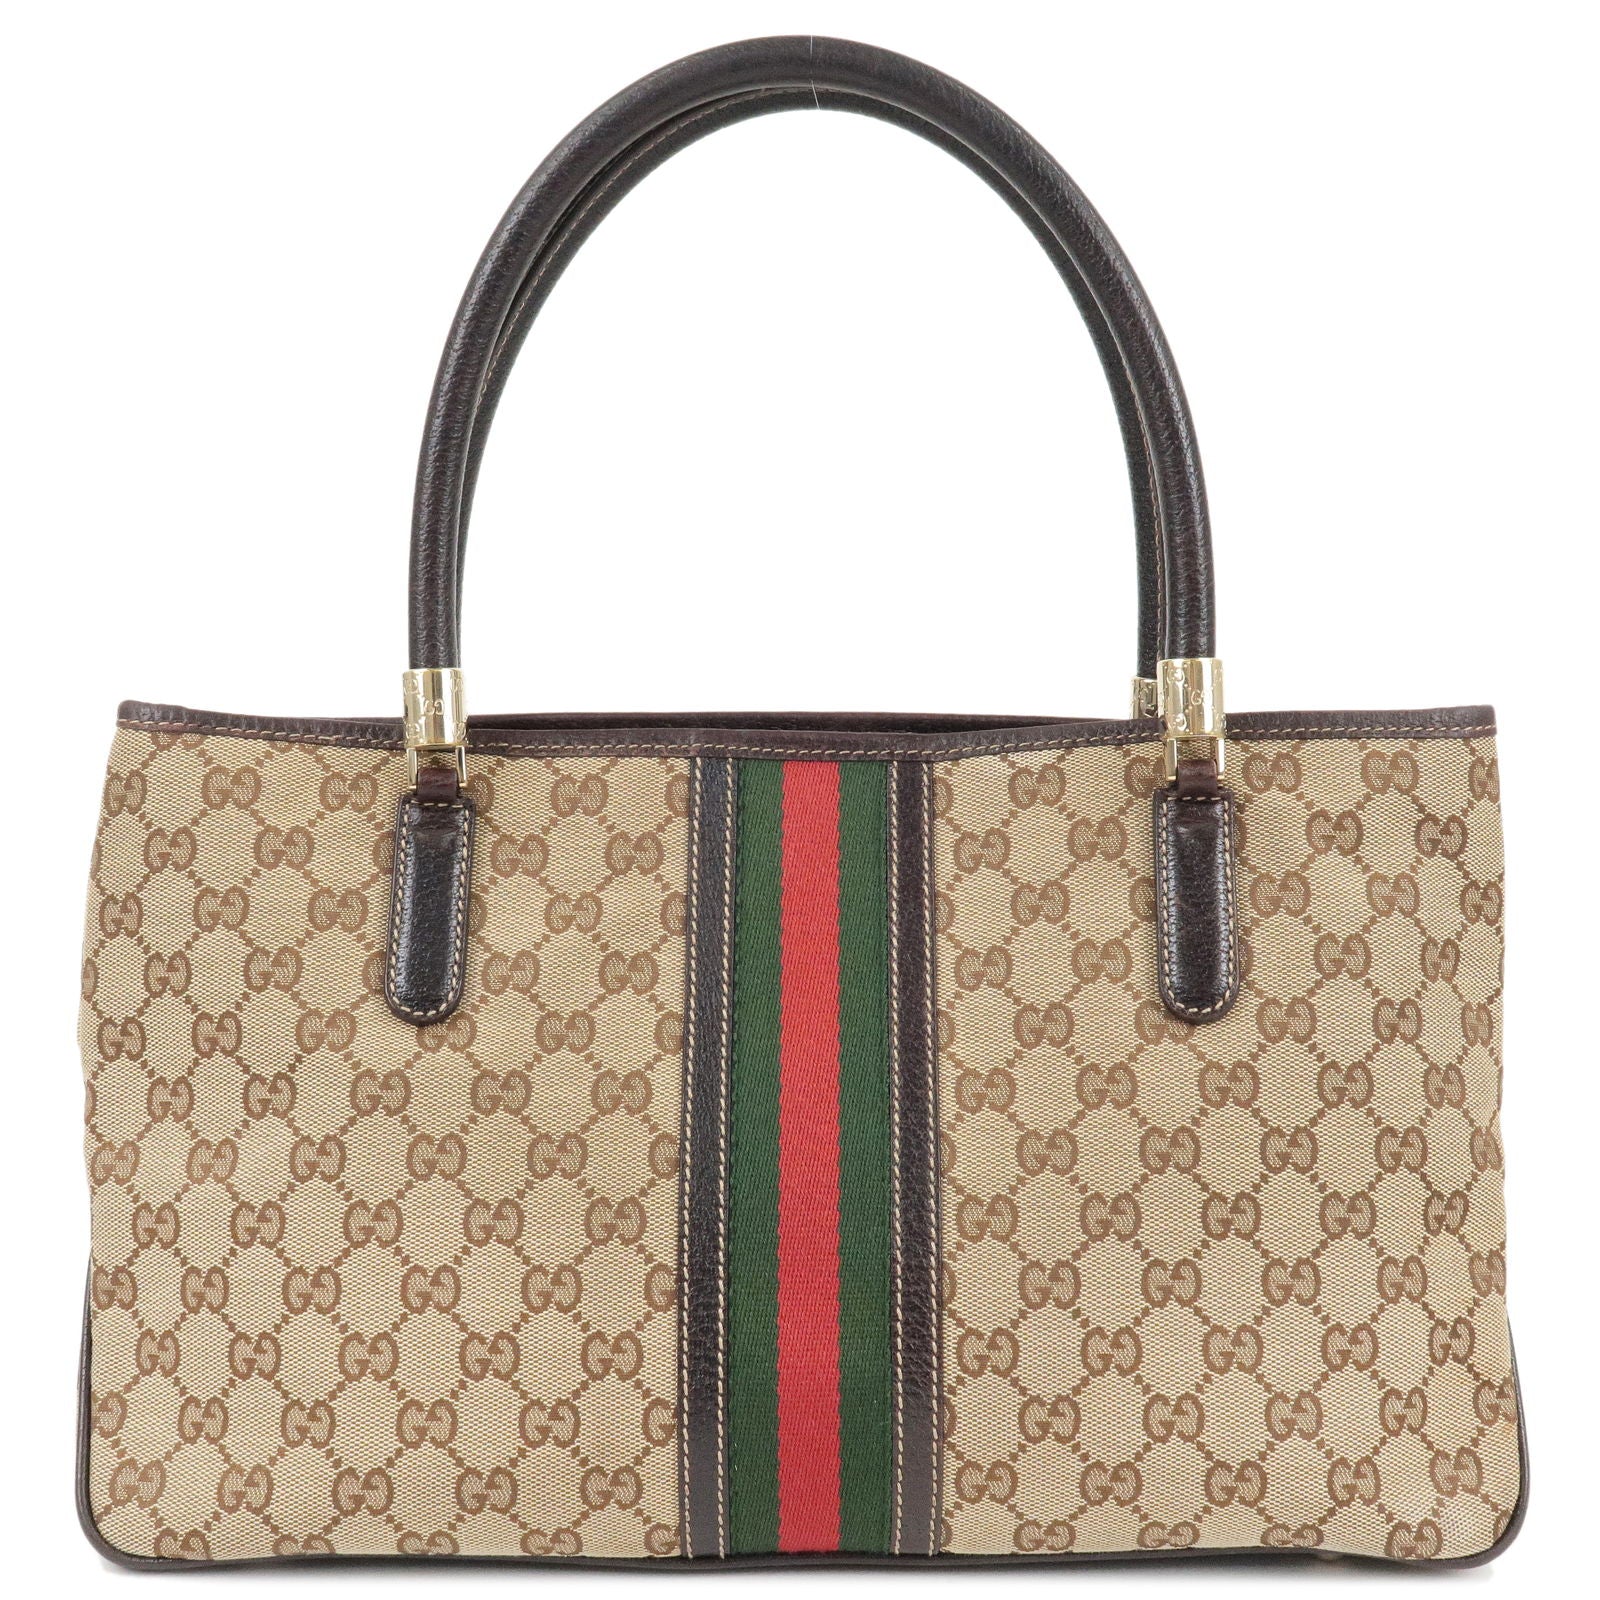 GUCCI-Sherry-GG-Canvas-Leather-Tote-Bag-Beige-Brown-161717